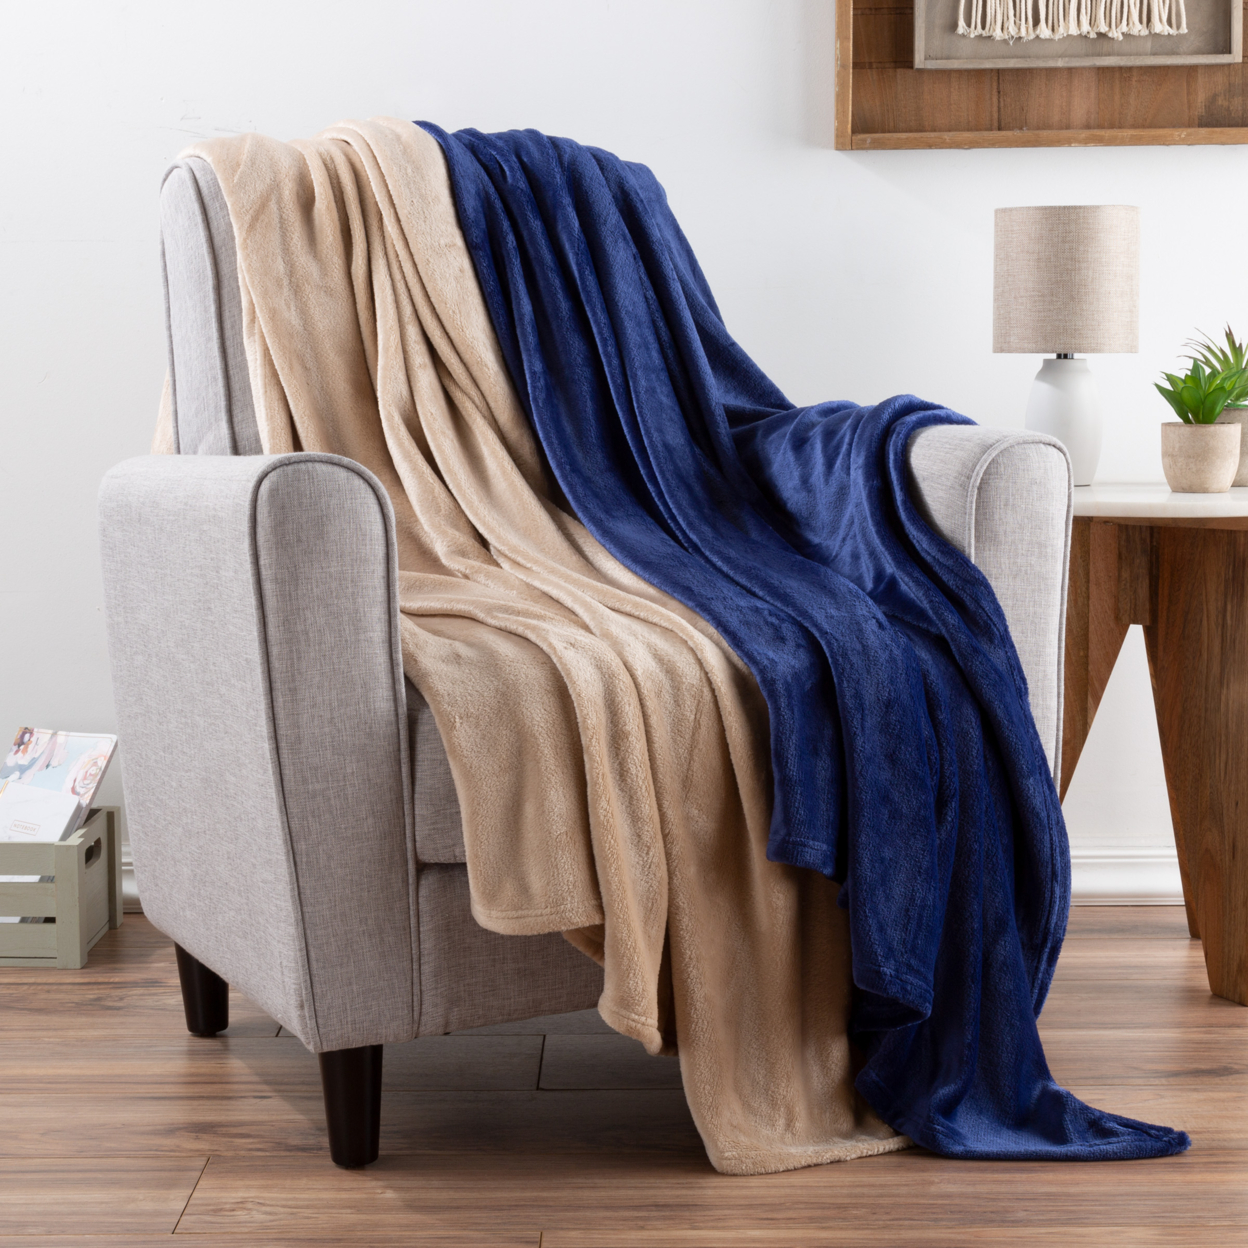 Fleece Throw Blanket-Set Of 2 Navy Blue & Sand Plush 50 X 60 Soft And Snuggly Couch Chair